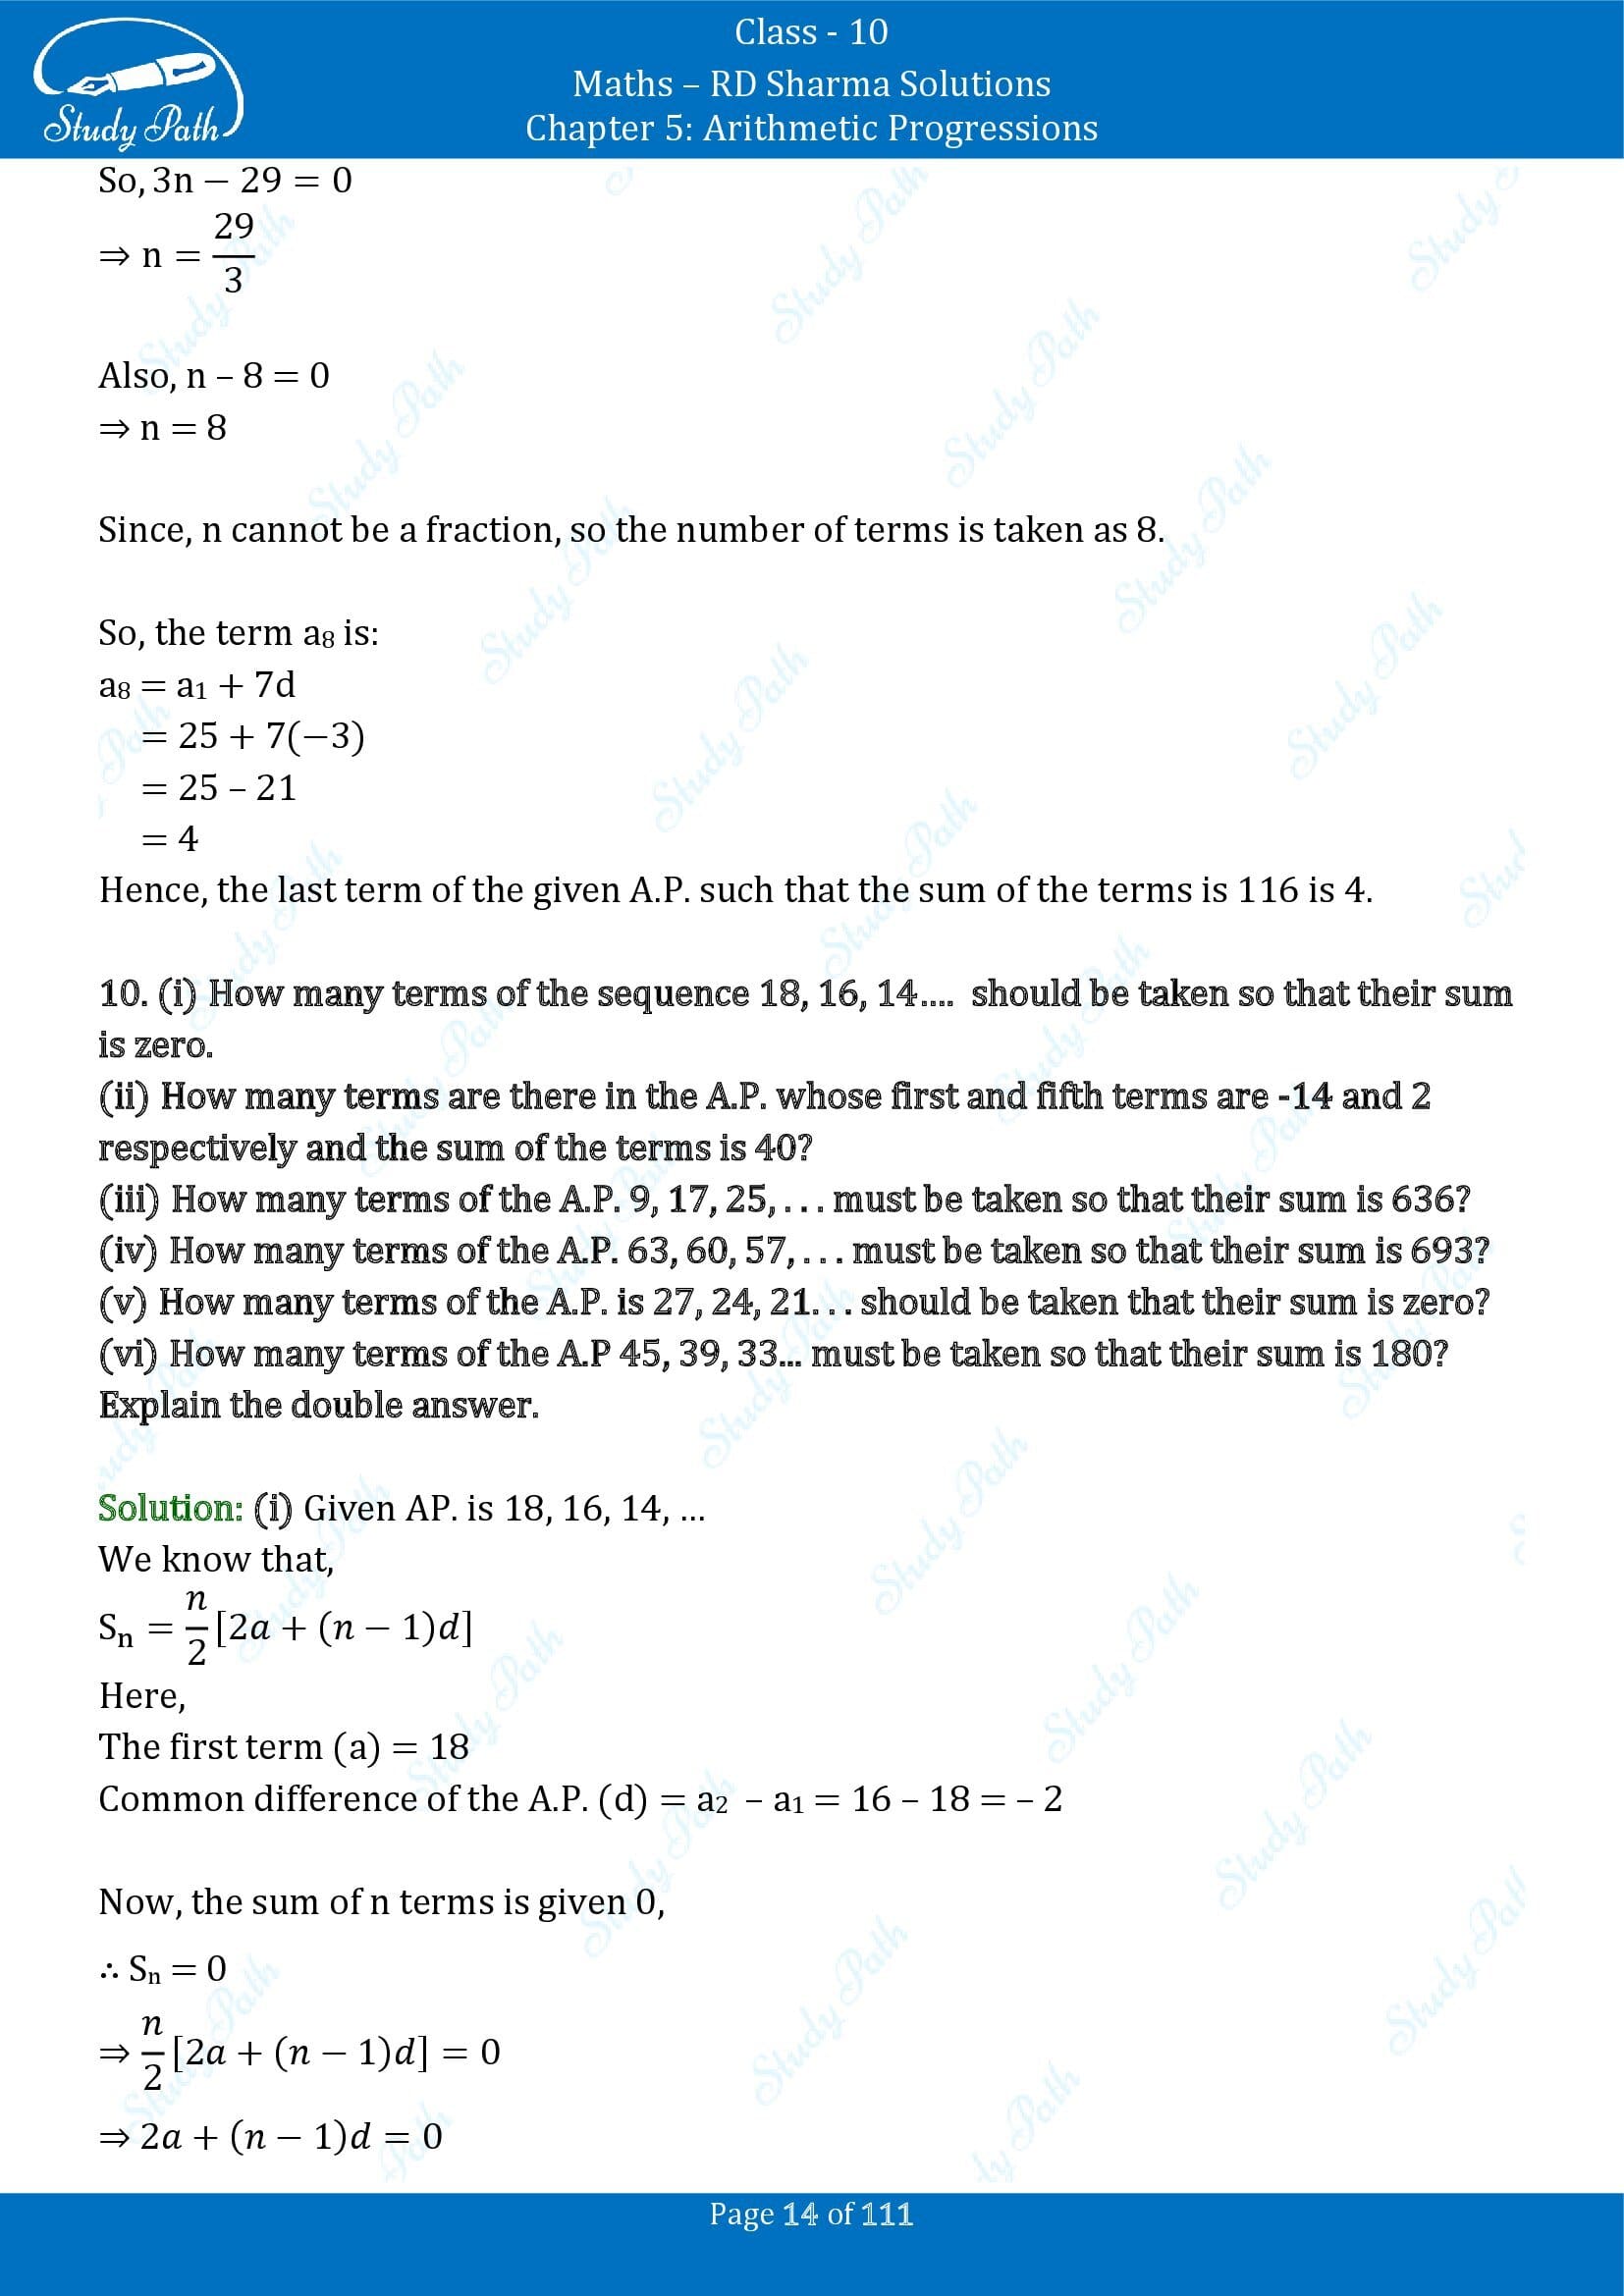 RD Sharma Solutions Class 10 Chapter 5 Arithmetic Progressions Exercise 5.6 00014